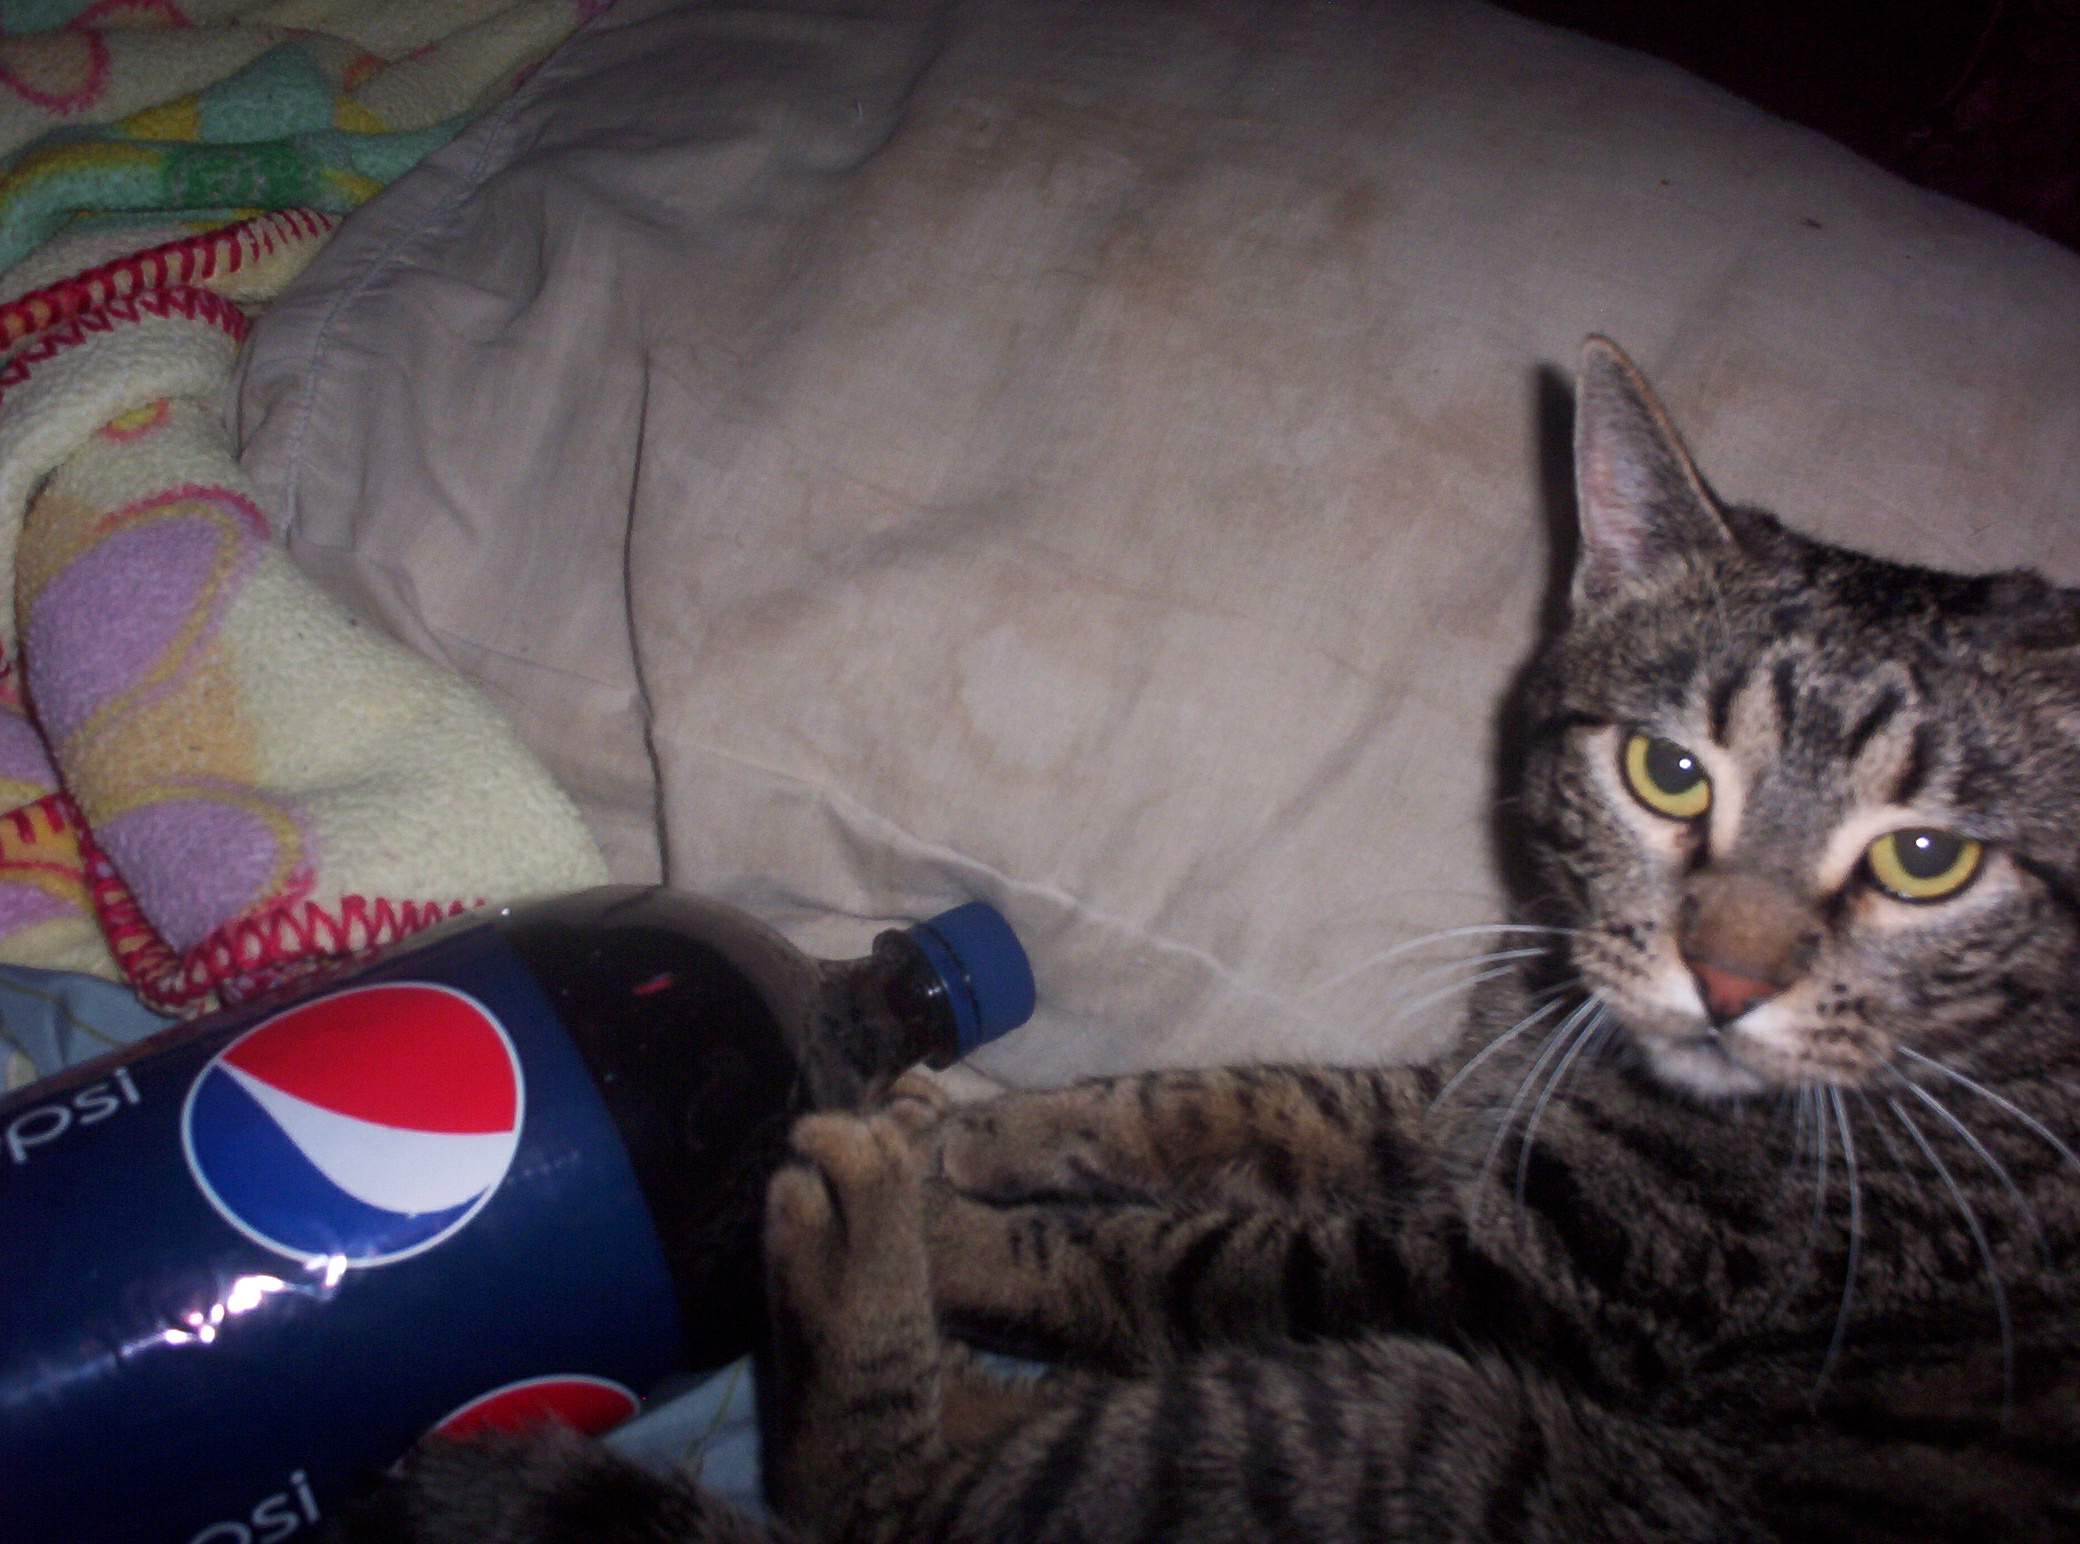 I wanted coke not pepsi, you so fired.